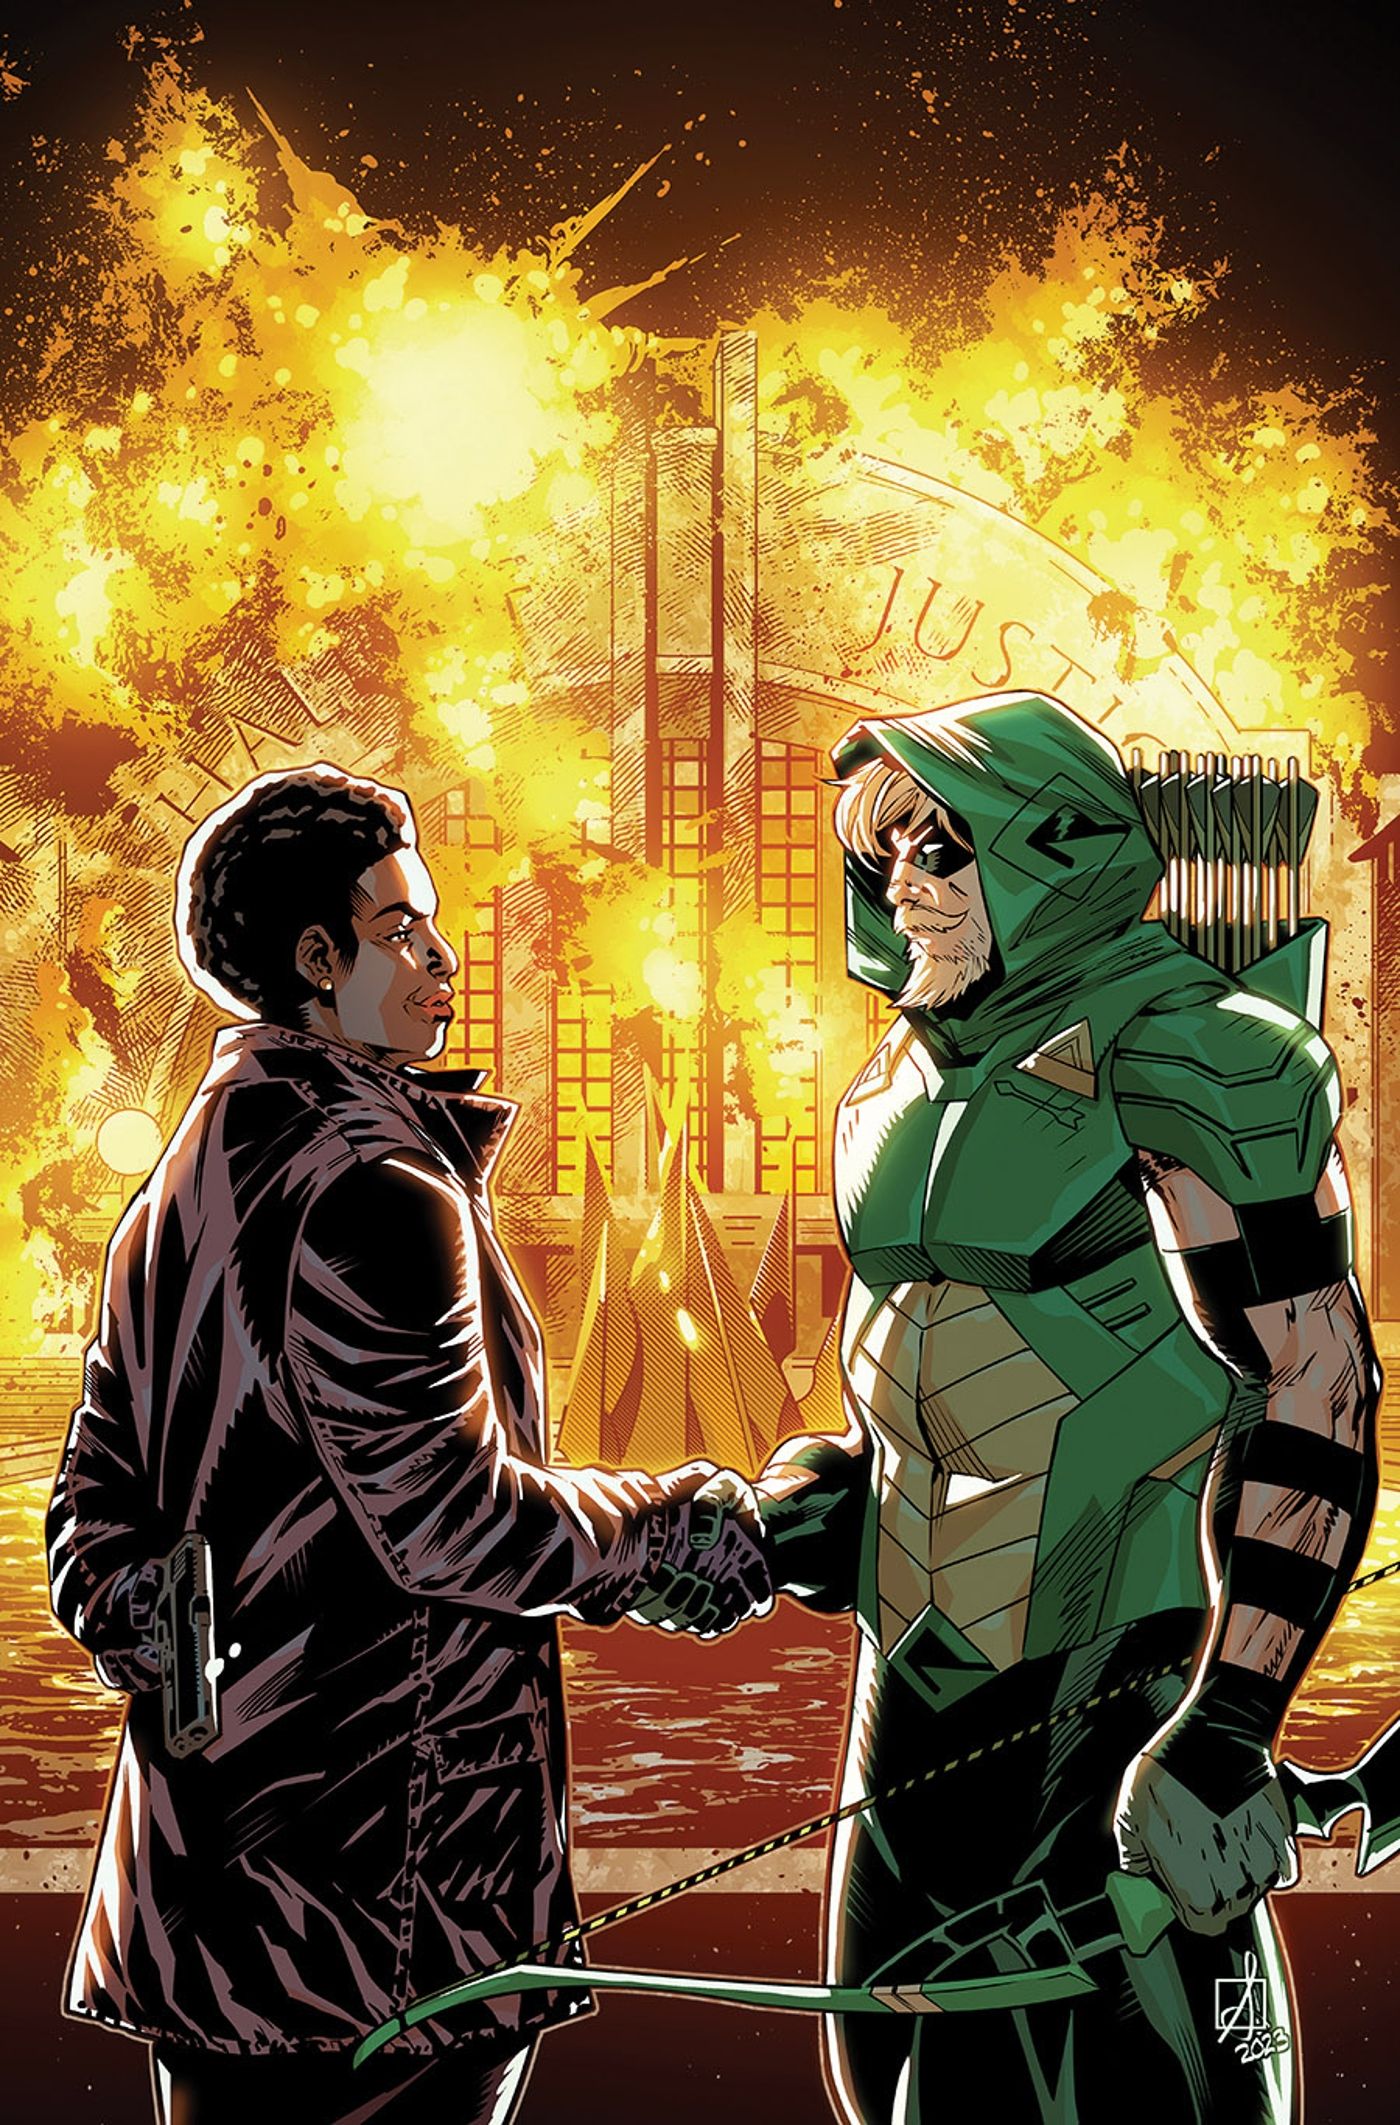 Amanda Waller (left) shakes hands with Green Arrow (right) in front of an exploding building.